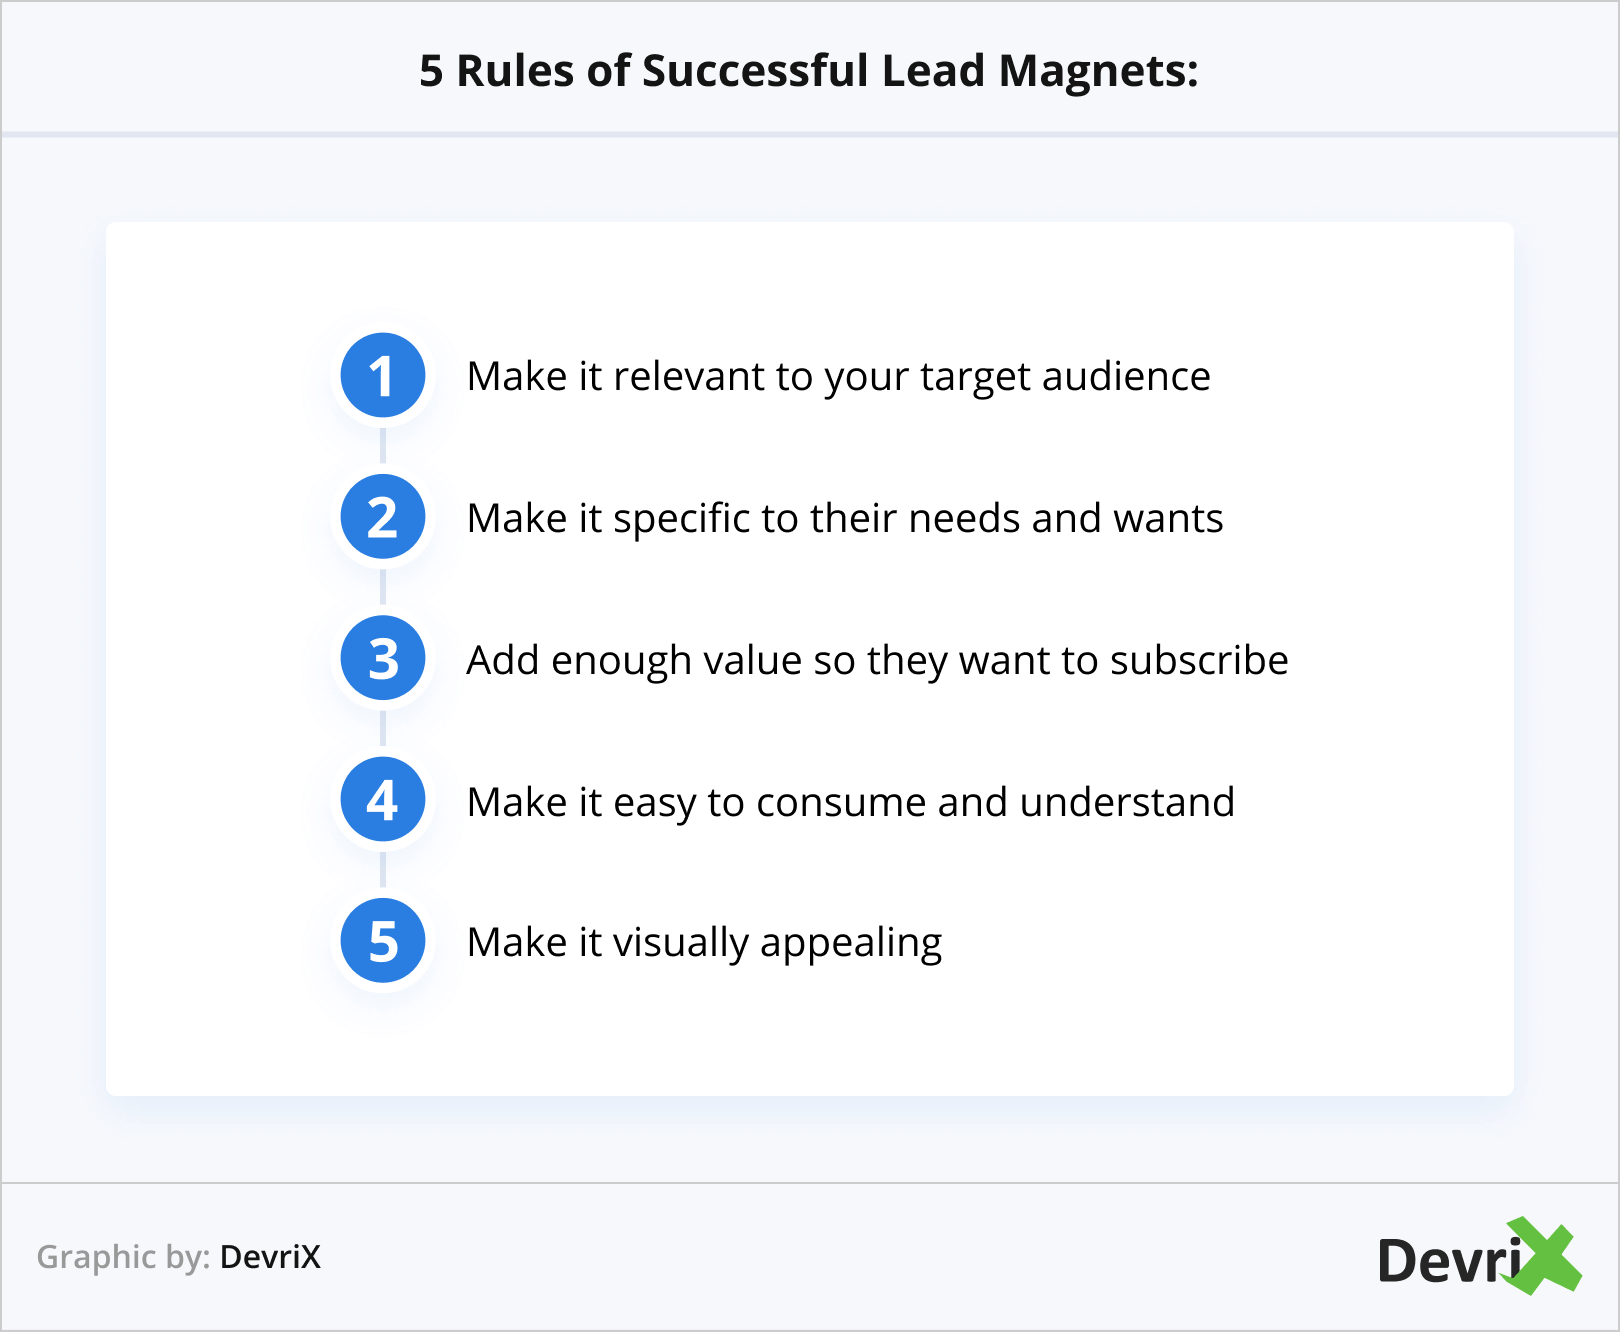 5 Rules of Successful Lead Magnets